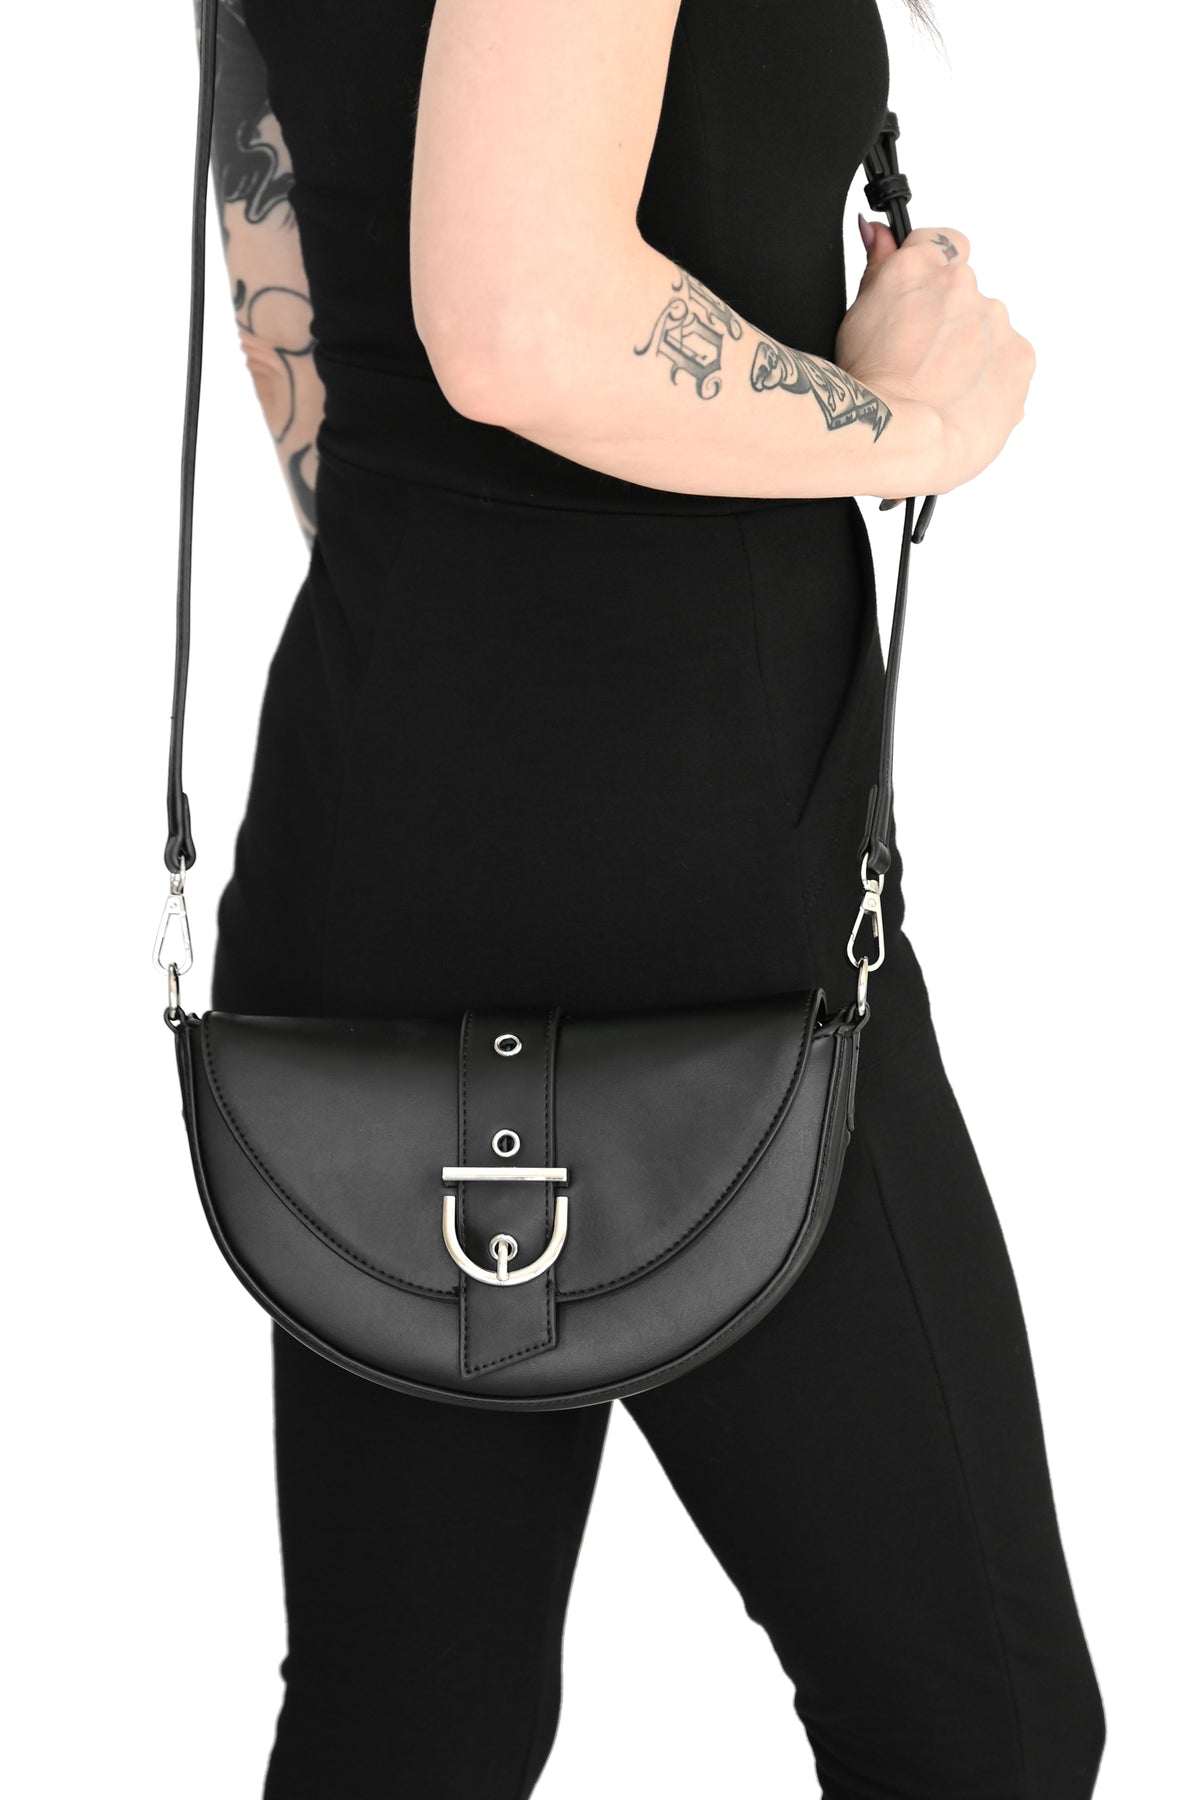 Black faux leather crescent shoulder purse with added crossbody strap and silver front buckle detail